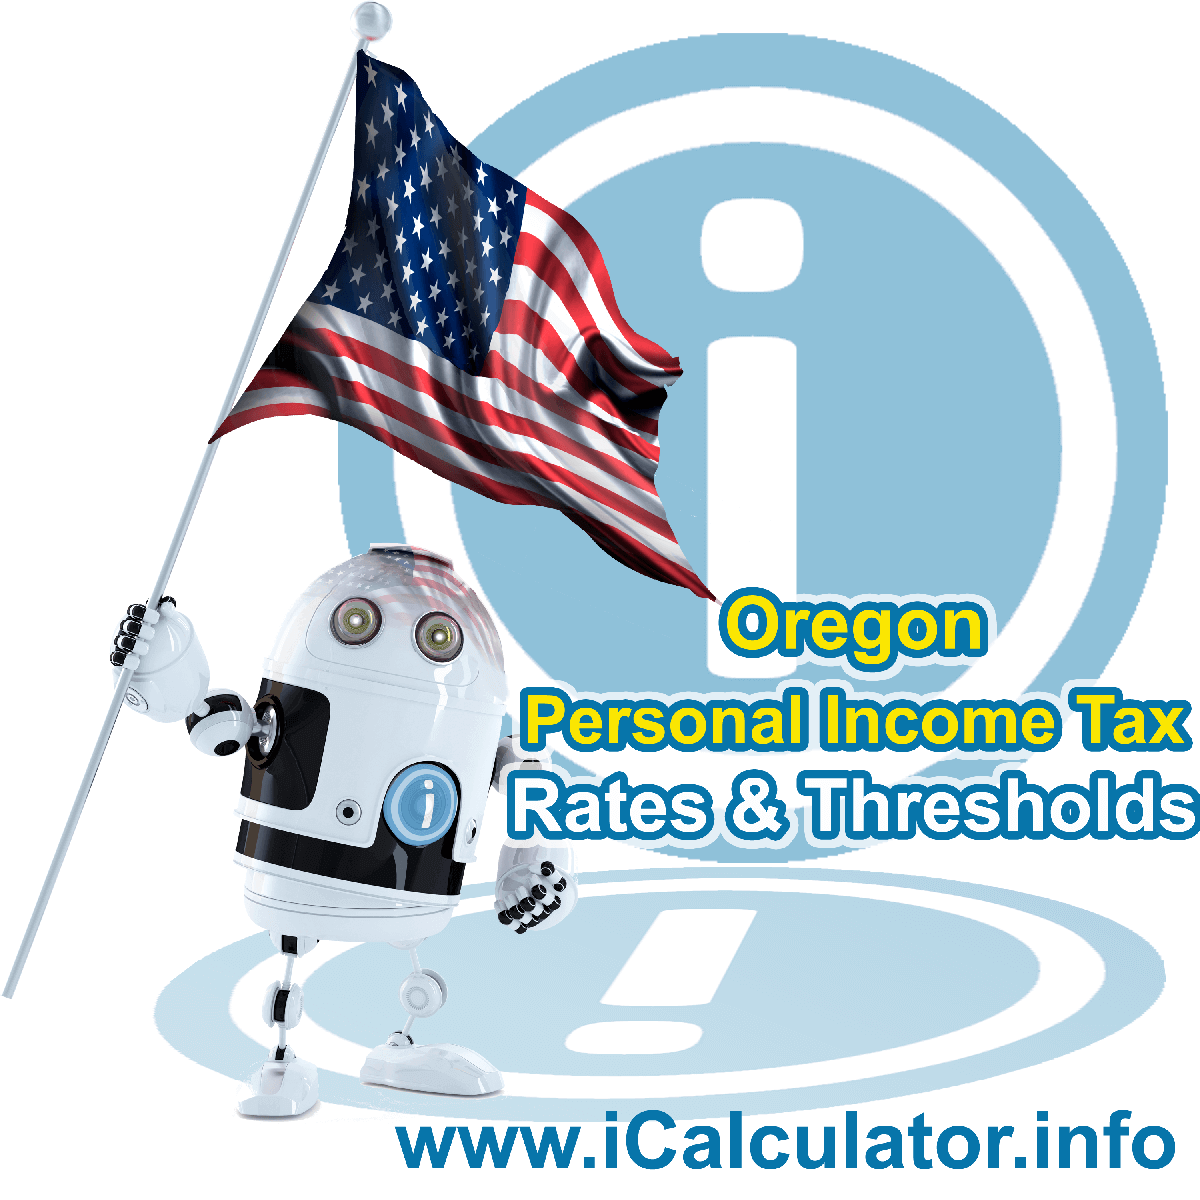 Oregon State Tax Tables 2020. This image displays details of the Oregon State Tax Tables for the 2020 tax return year which is provided in support of the 2020 US Tax Calculator